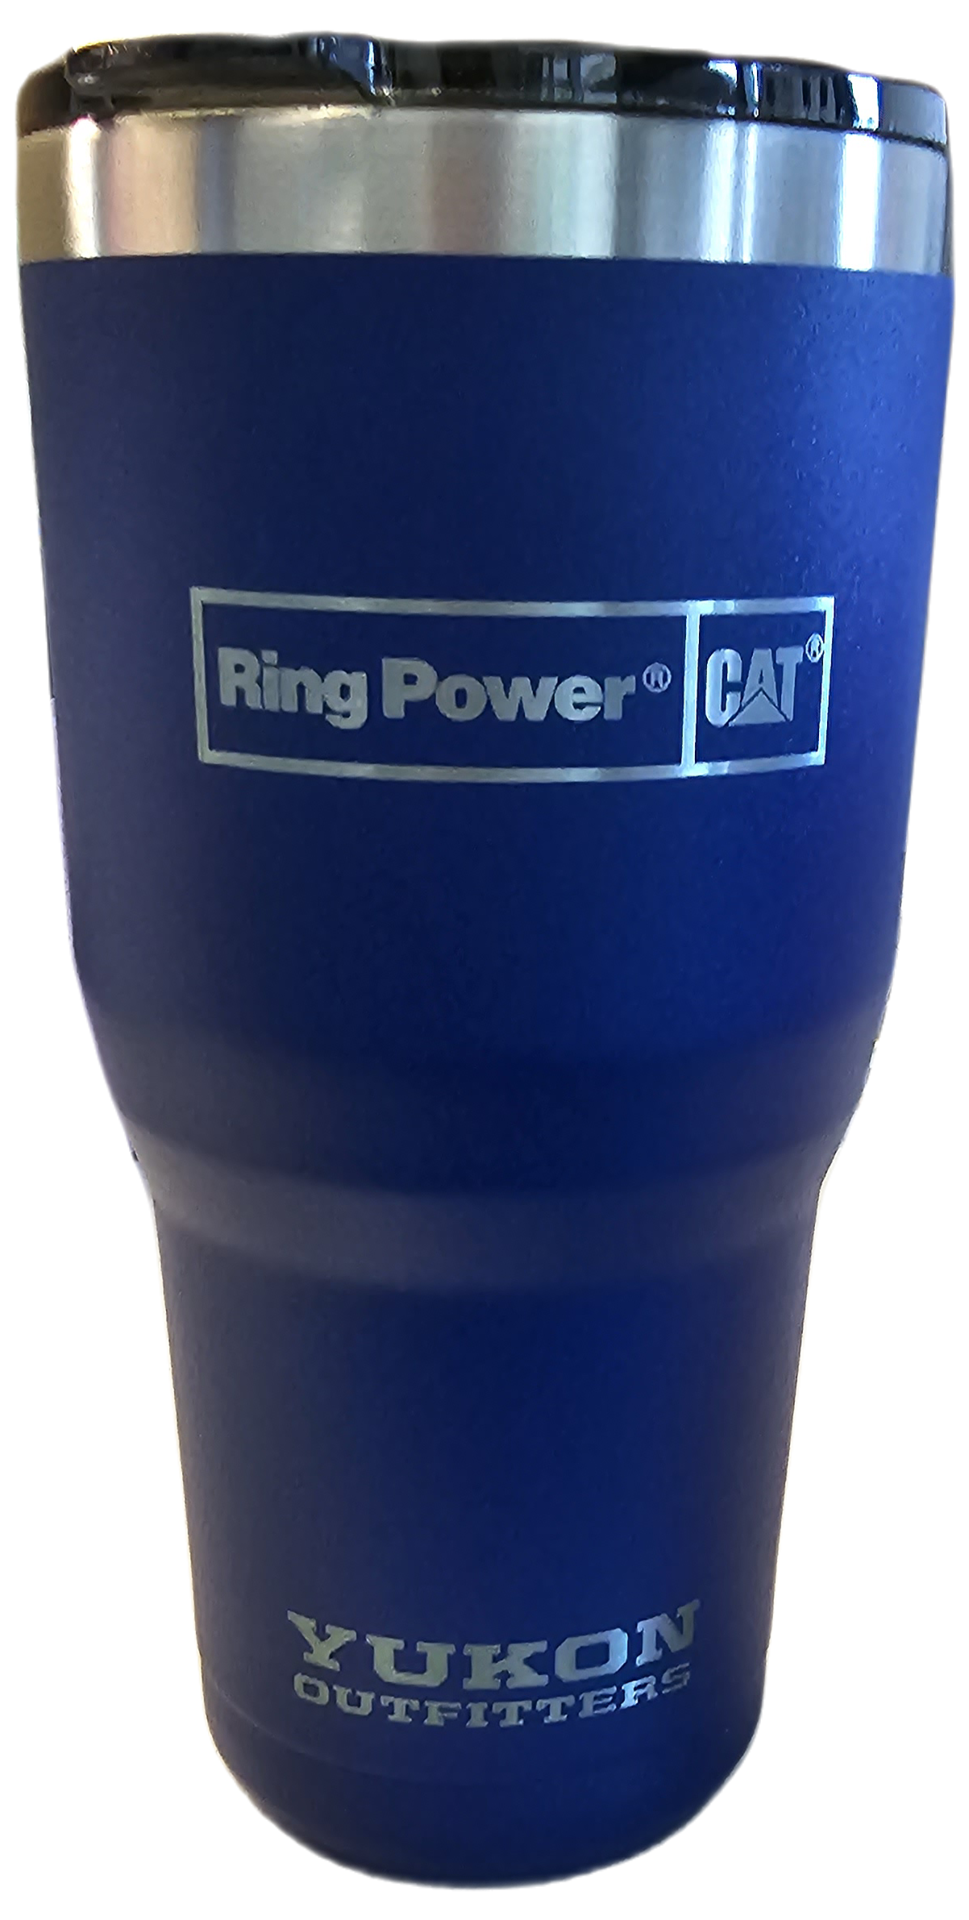 https://storefront.ringpower.com/images/thumbs/0003945_30%20oz%20royal%20blue.png